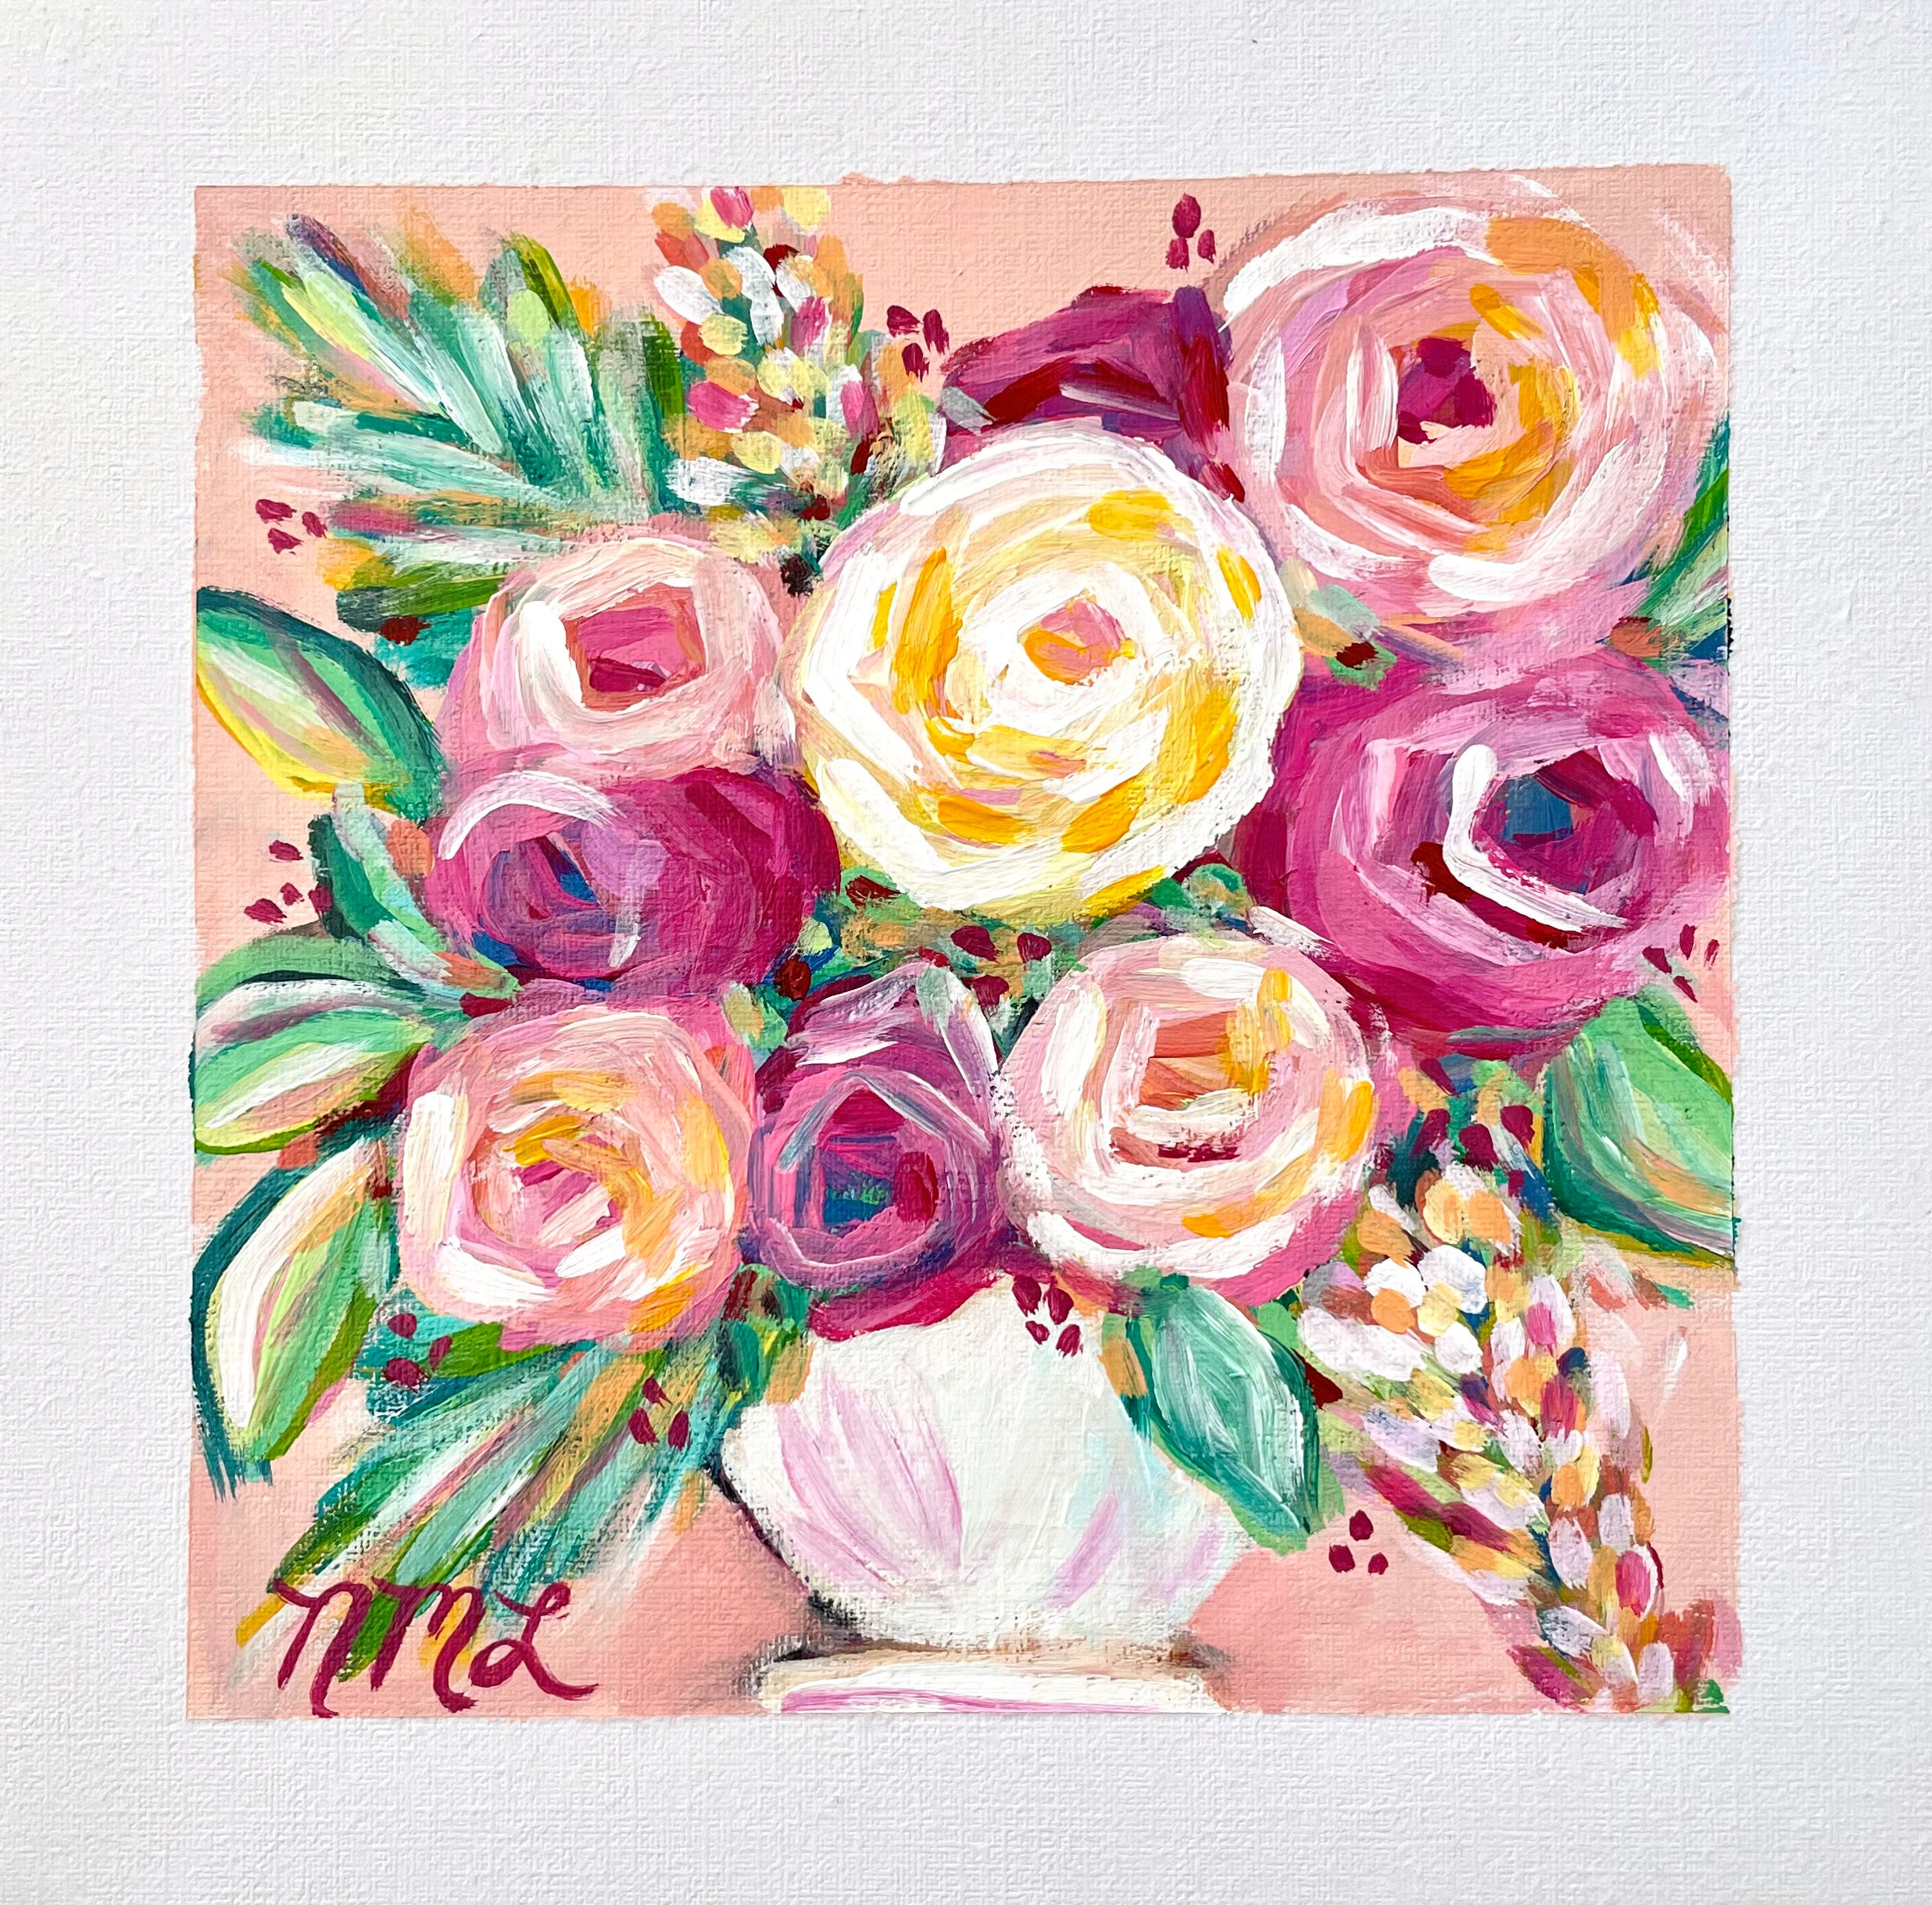 Time For Tea | Nicole May Lesher | Original Fine Art Flower Painting on Paper 